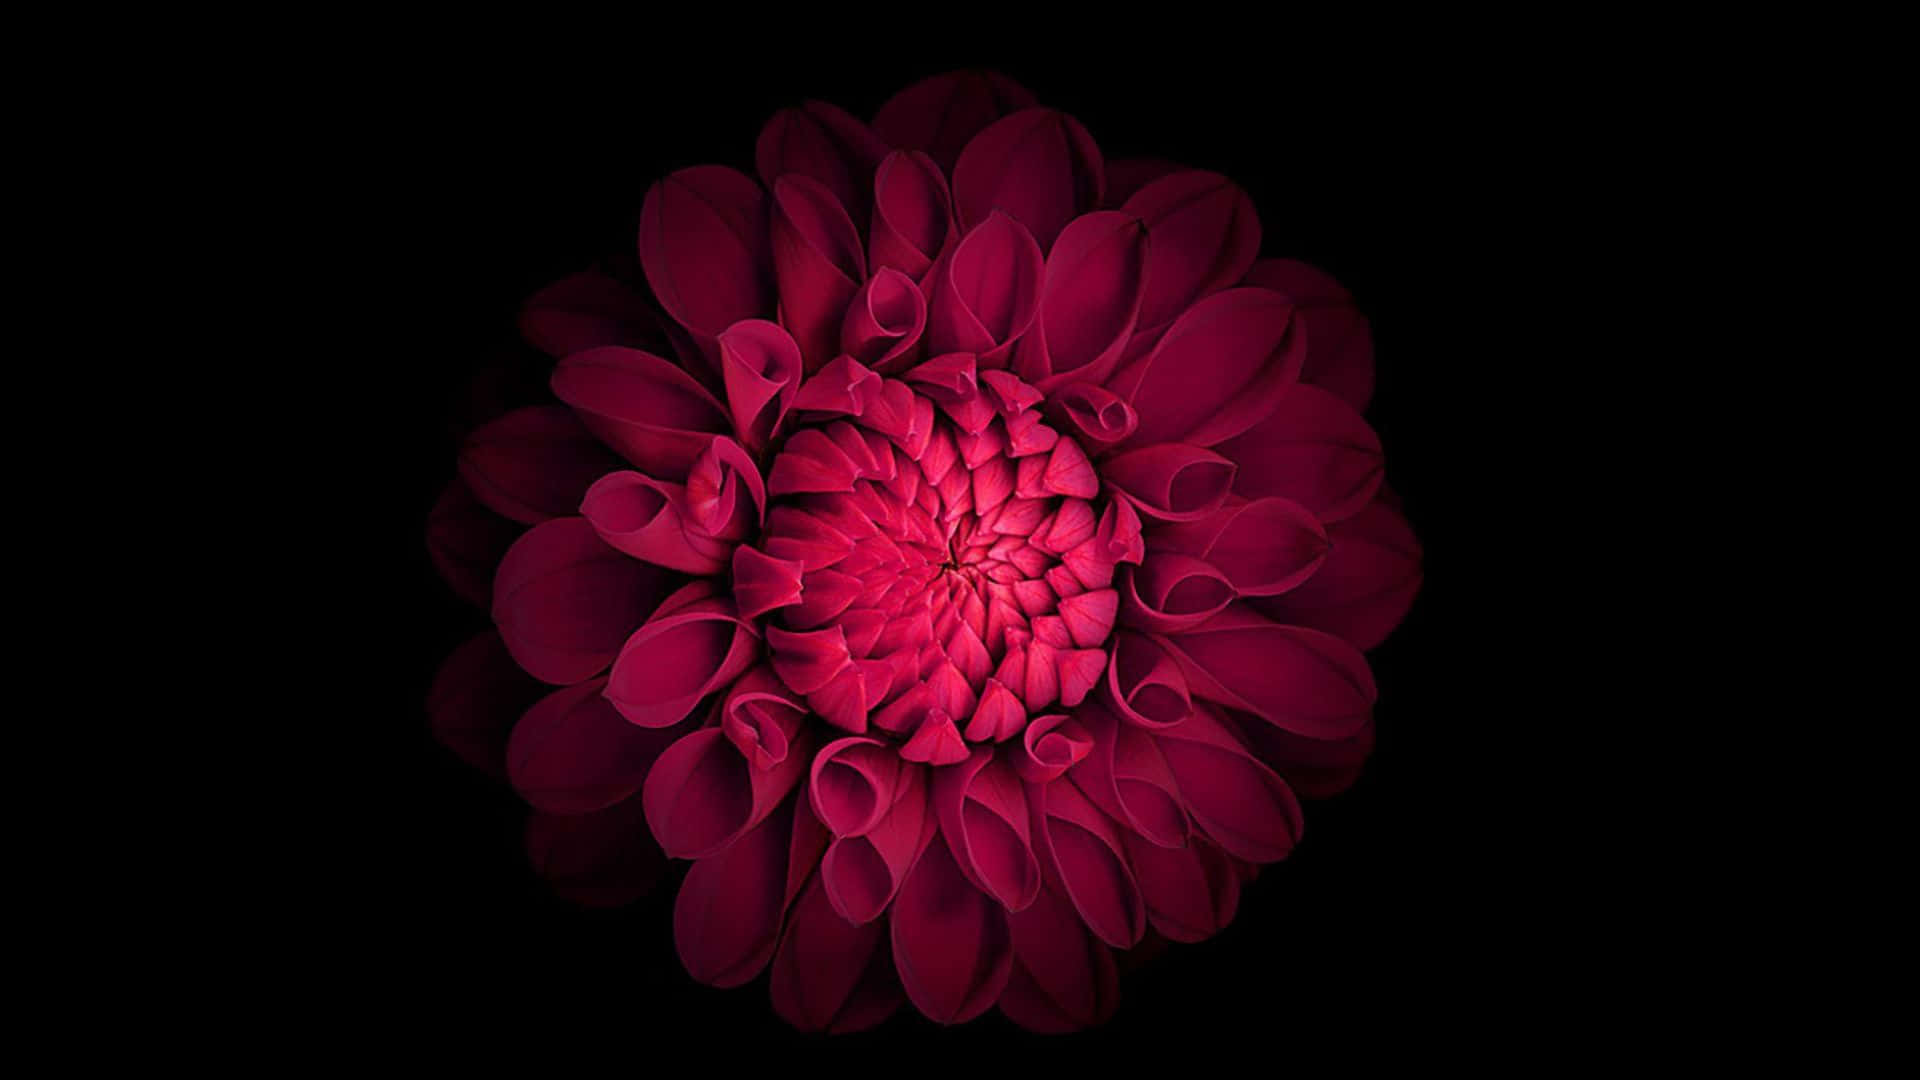 Download A Red Flower On A Black Background | Wallpapers.com